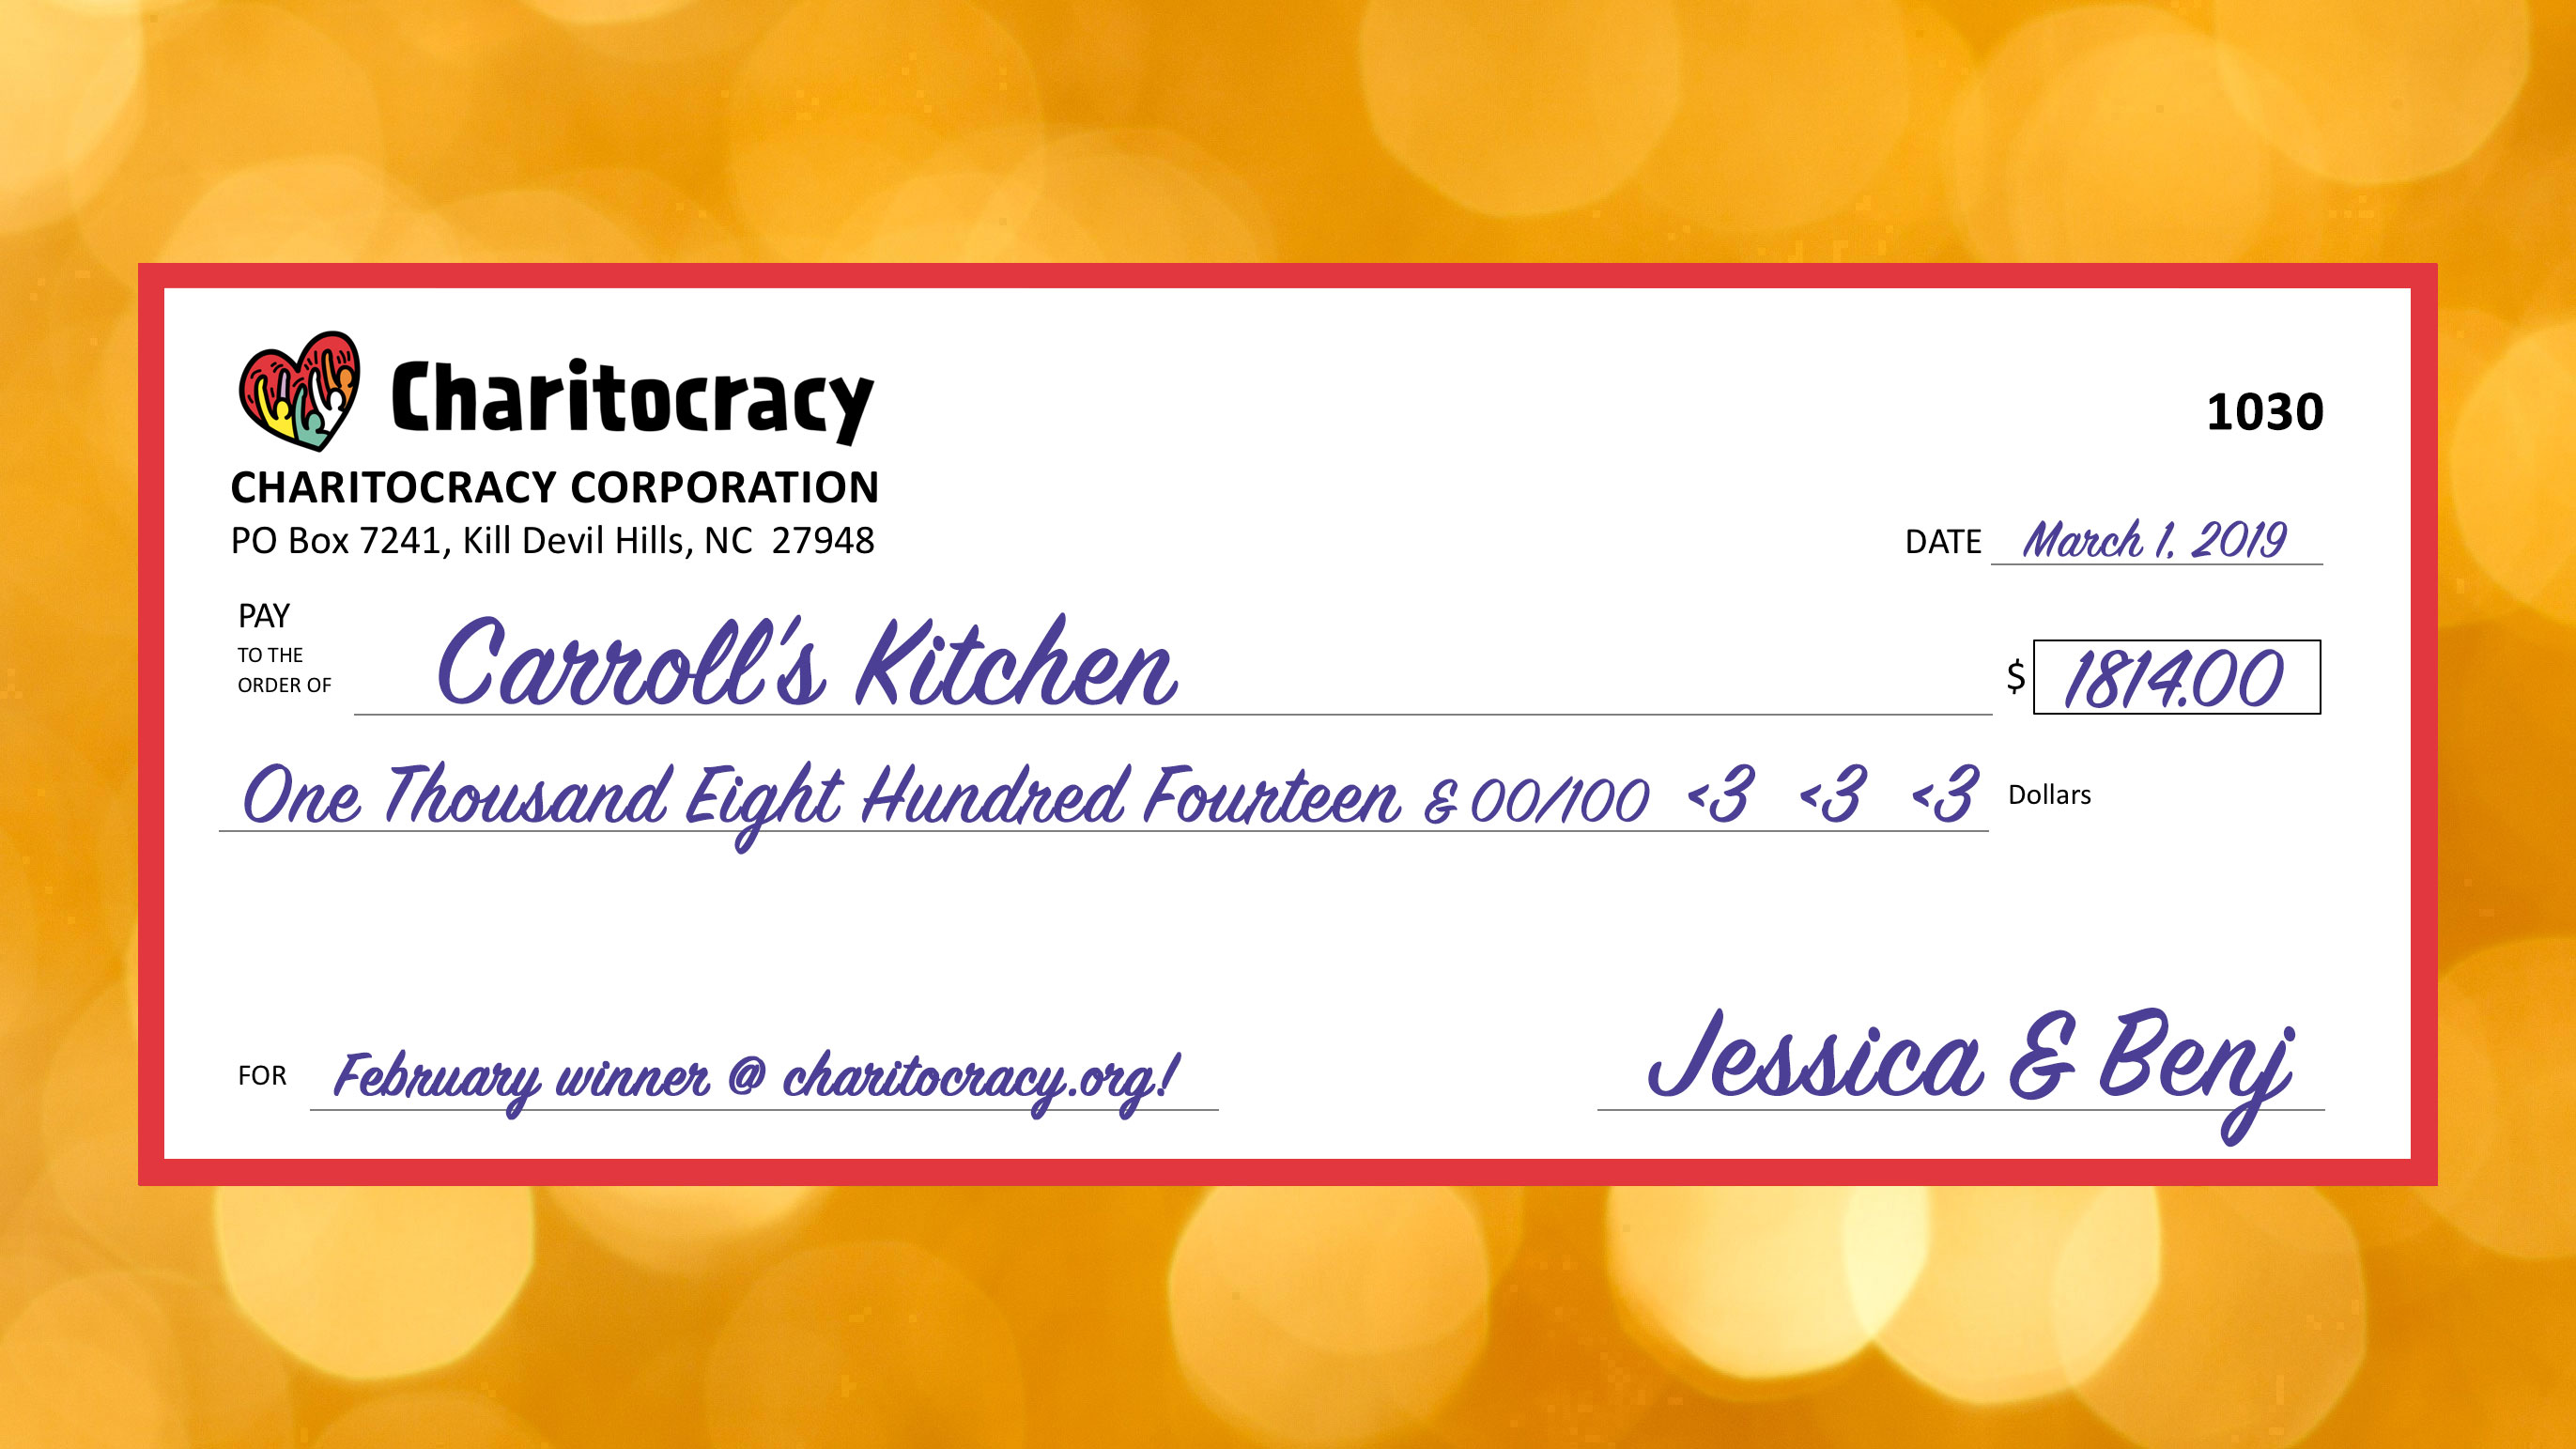 Charitocracy's 30th check to February winner Carroll's Kitchen for $1814